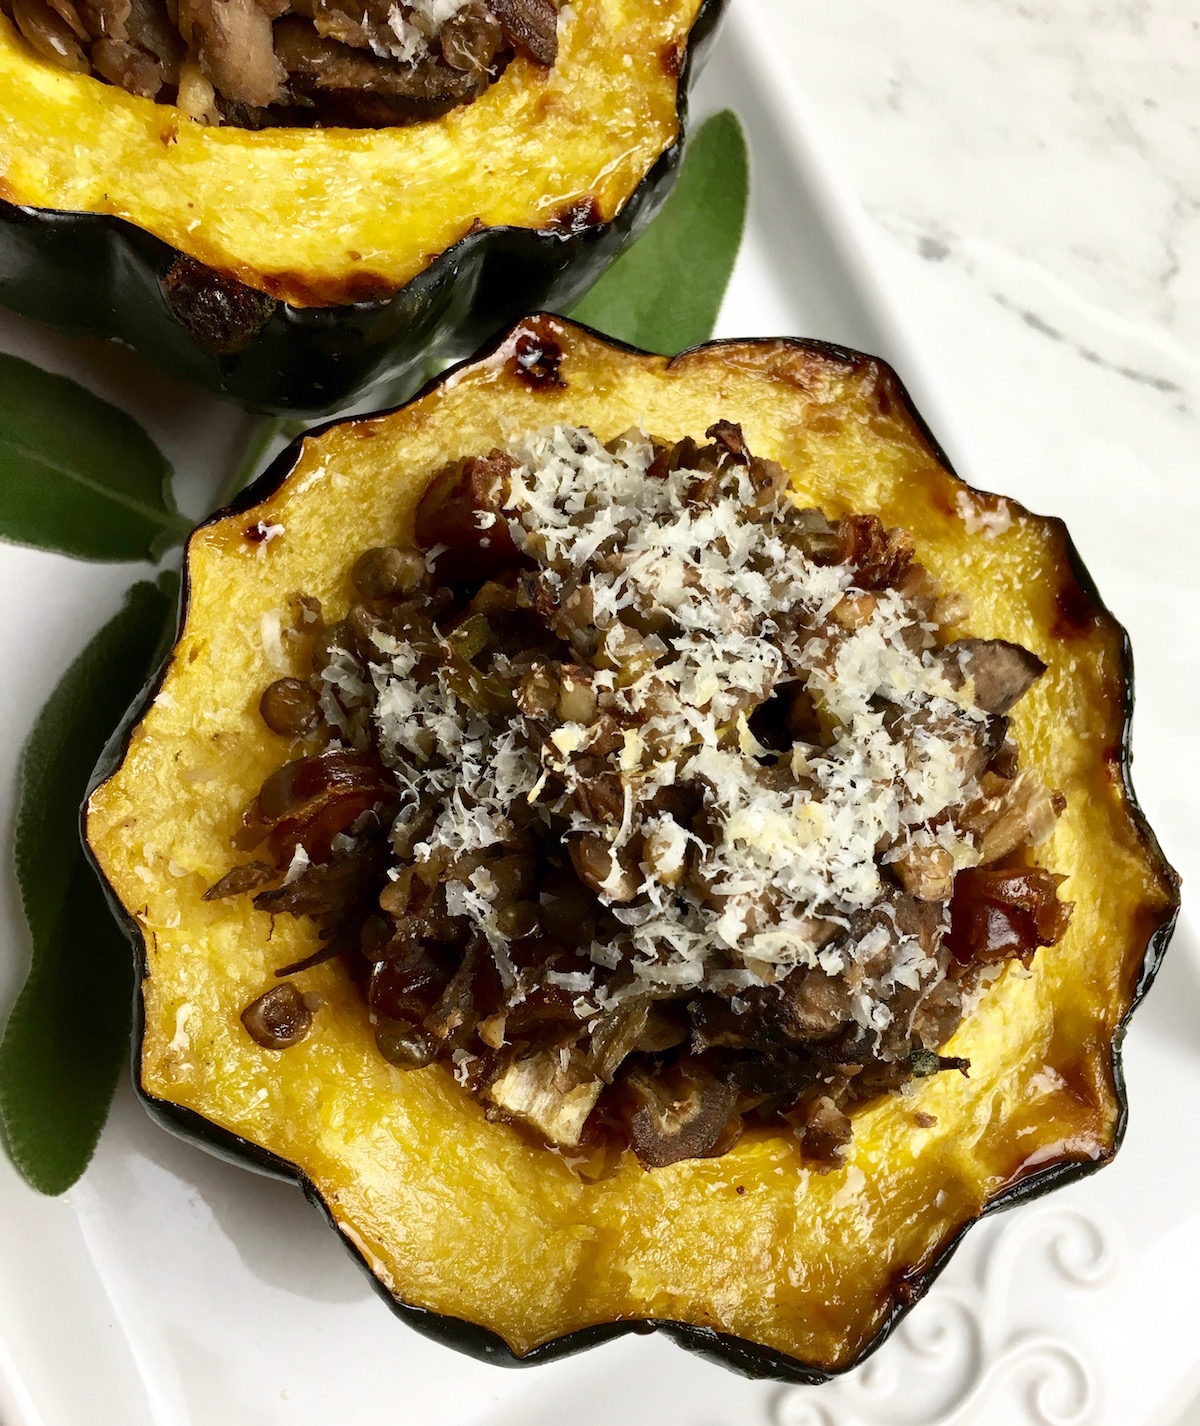 Looking for an acorn stuffed squash recipe? This is a protein packed dish that is filled with packed flavor. It can easily be changed to be a vegetarian stuffed acorn recipe. Enjoy this fall recipe for a delicious weeknight dinner.